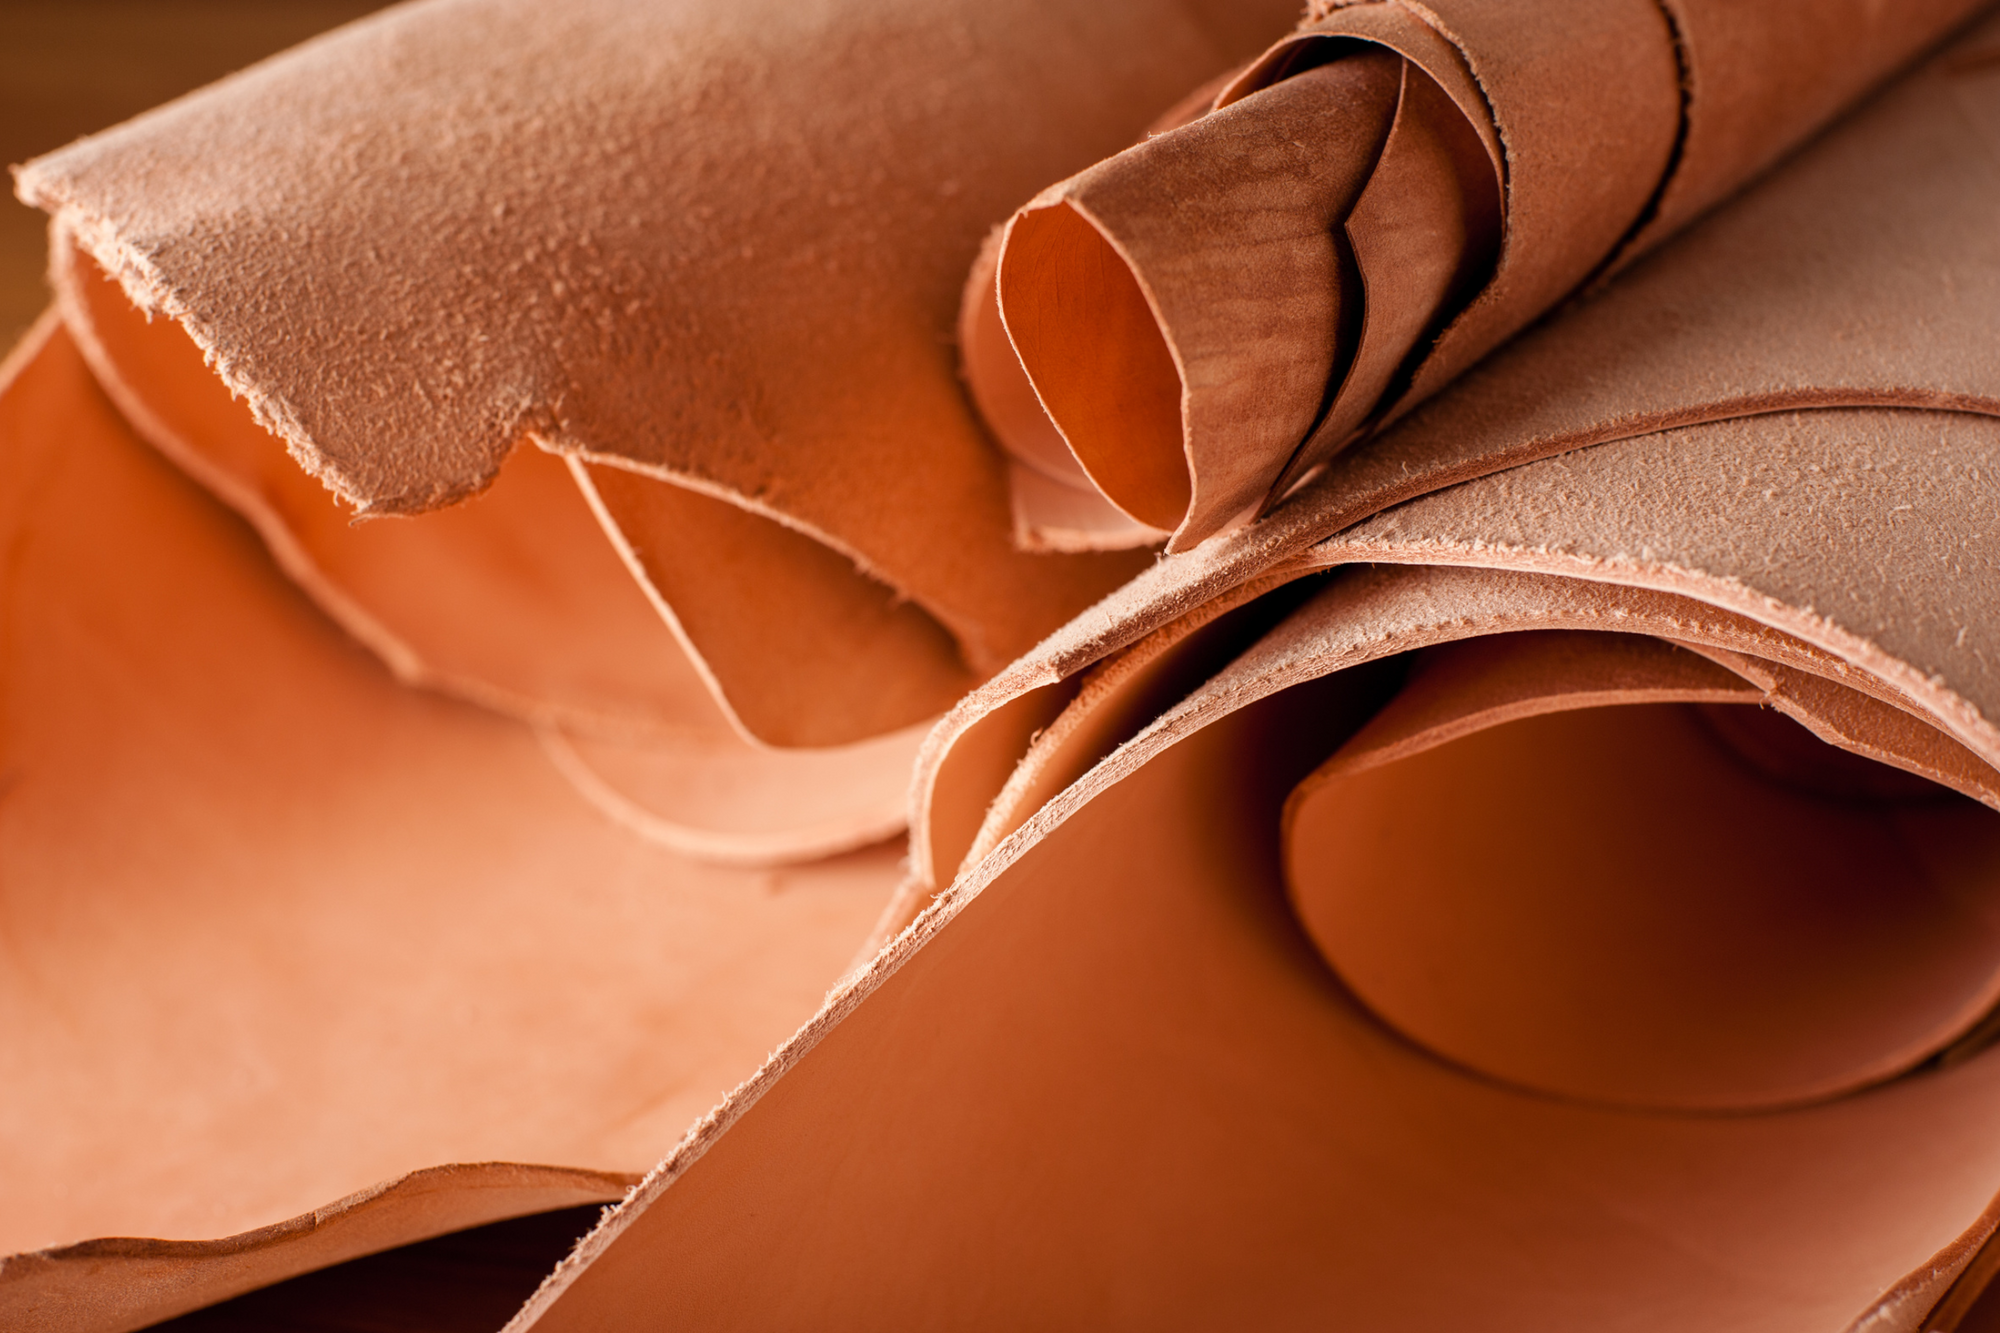 The Art of Vegetable-Tanned Leather: An In-Depth Look at the Process, Quality, and Benefits